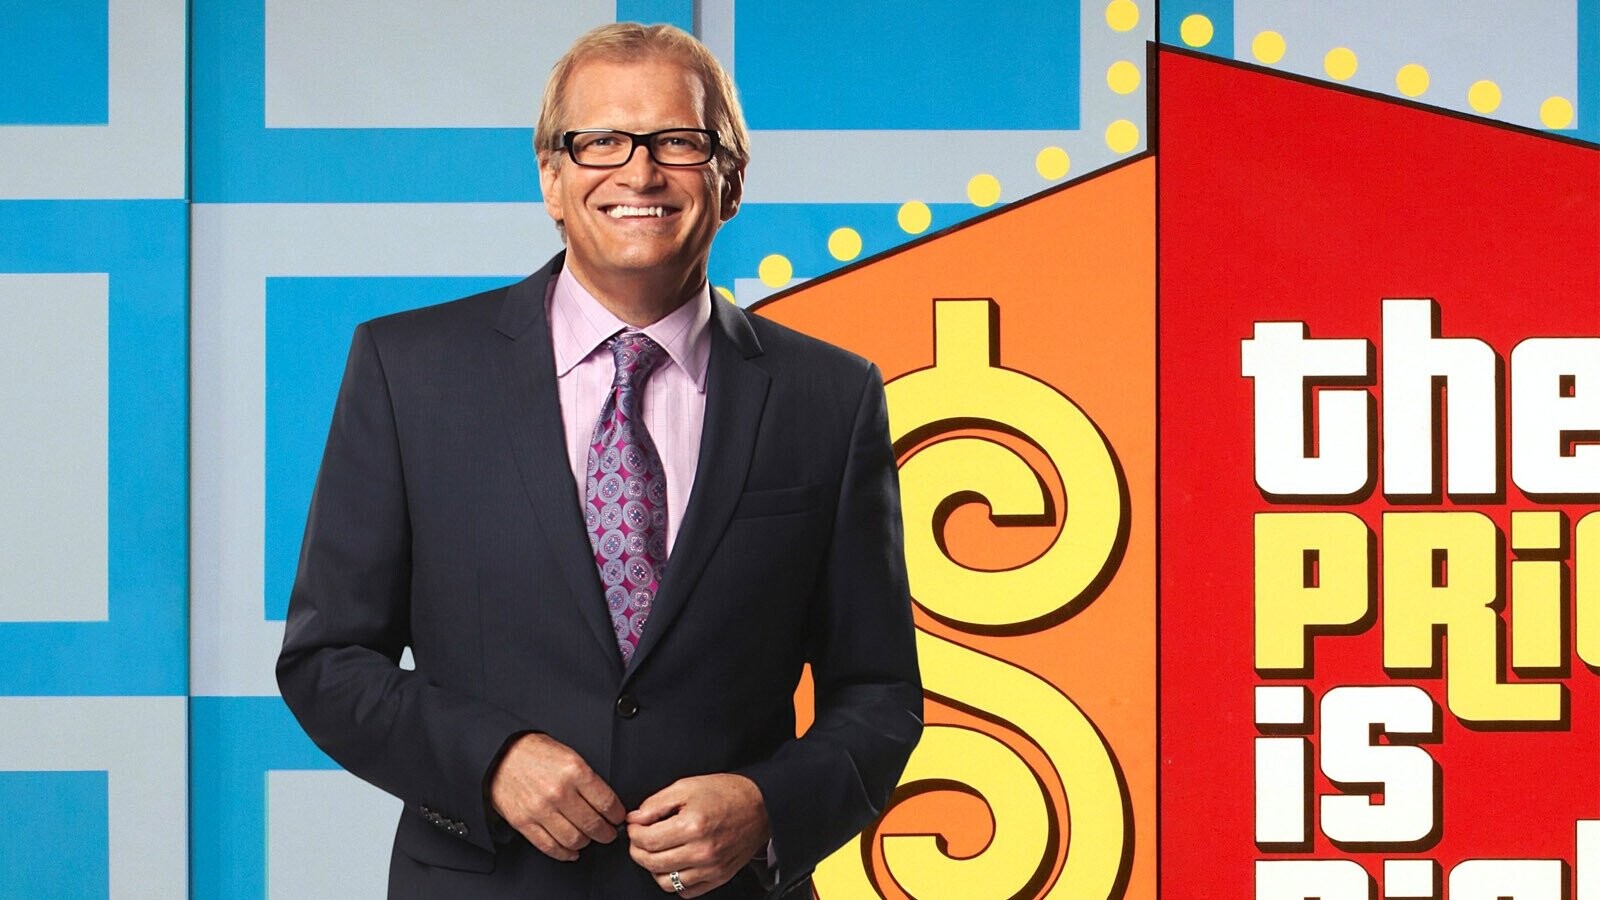 QnA VBage Drew Carey’s Initial Response to ‘Price is Right’ Offer: “F*ck No!”